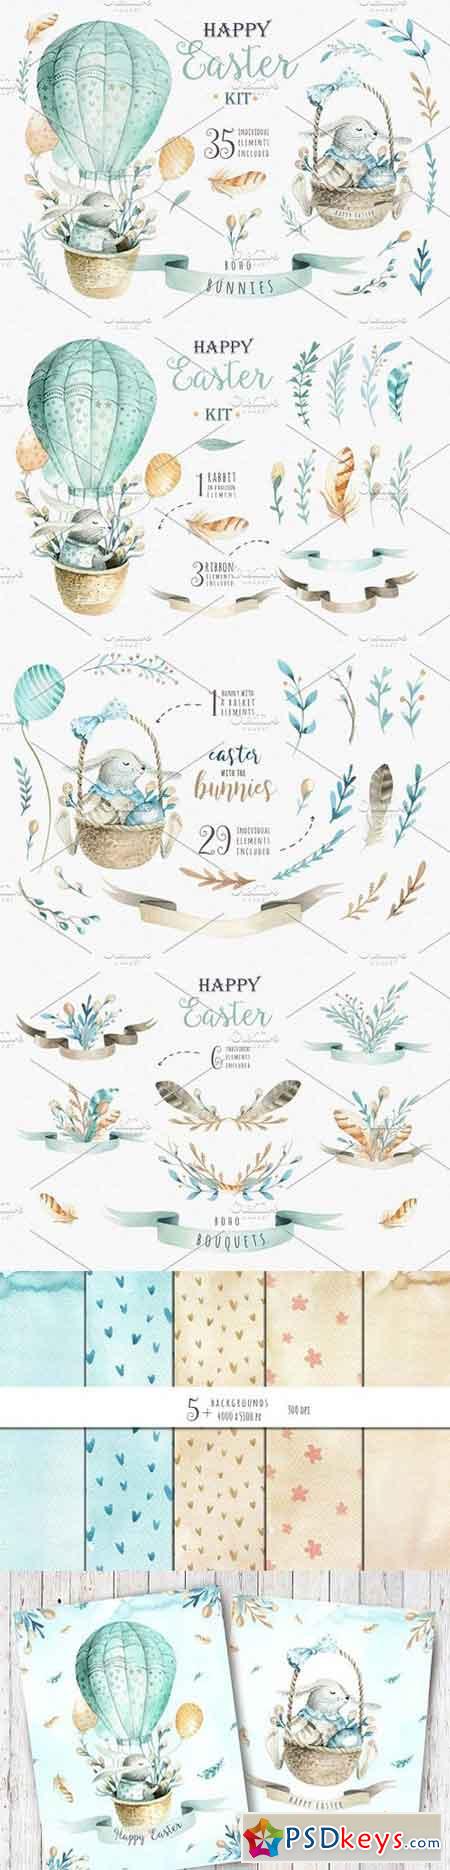 Happy easter with bunnies I 1269937